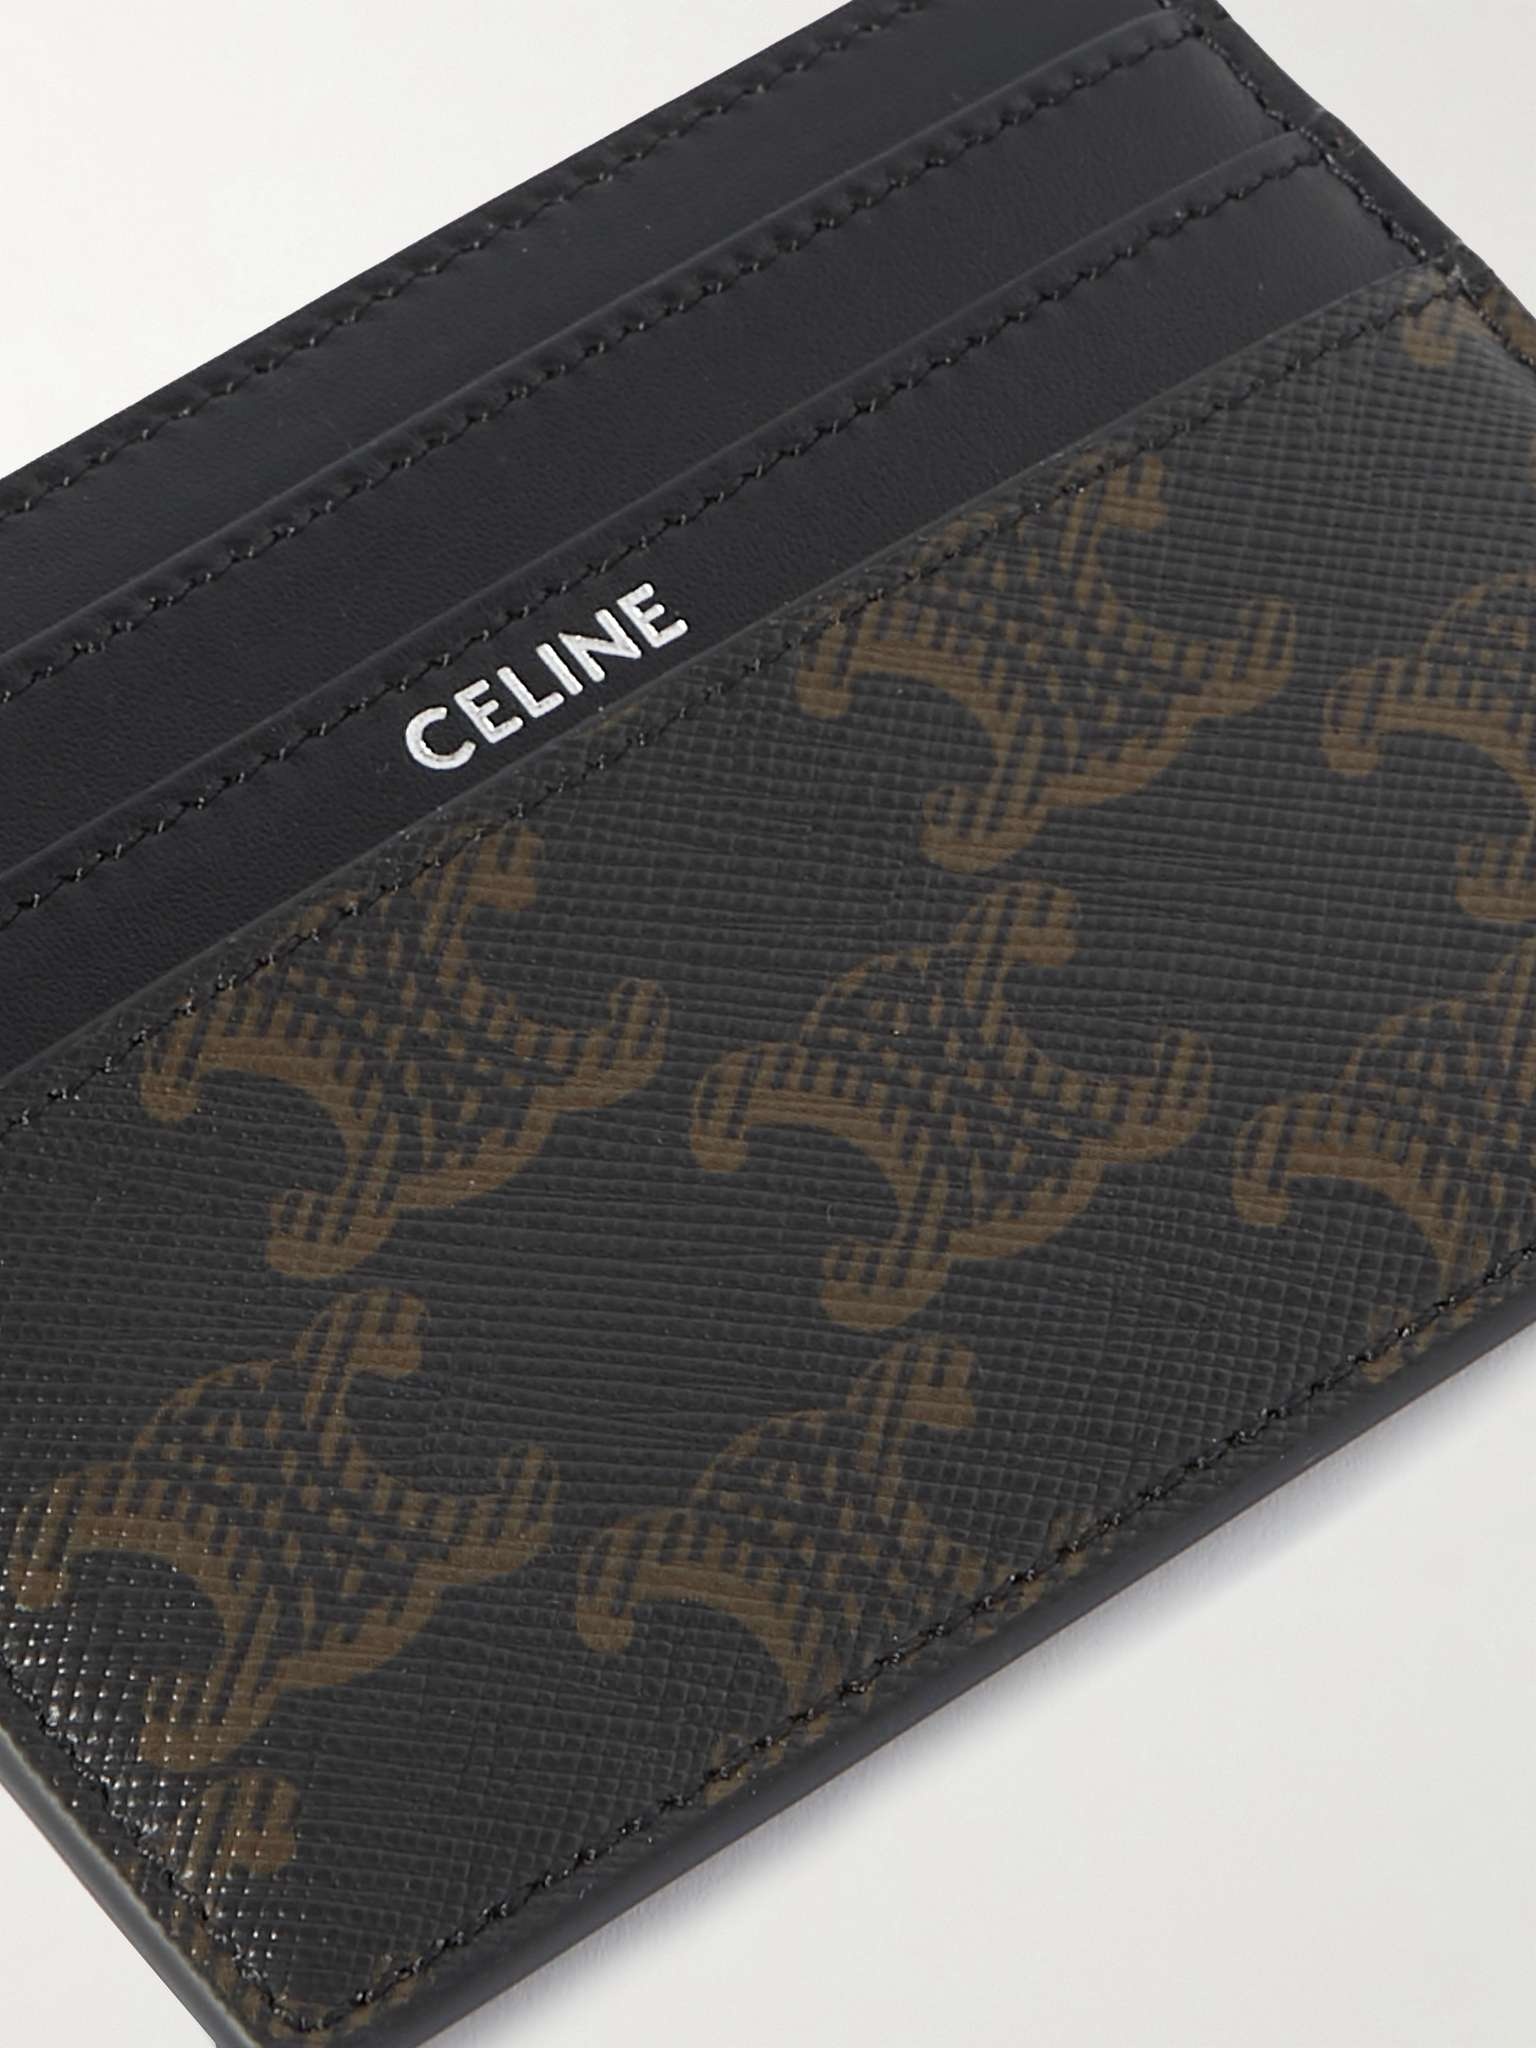 CELINE HOMME Triomphe Leather-Trimmed Coated-Canvas Billfold